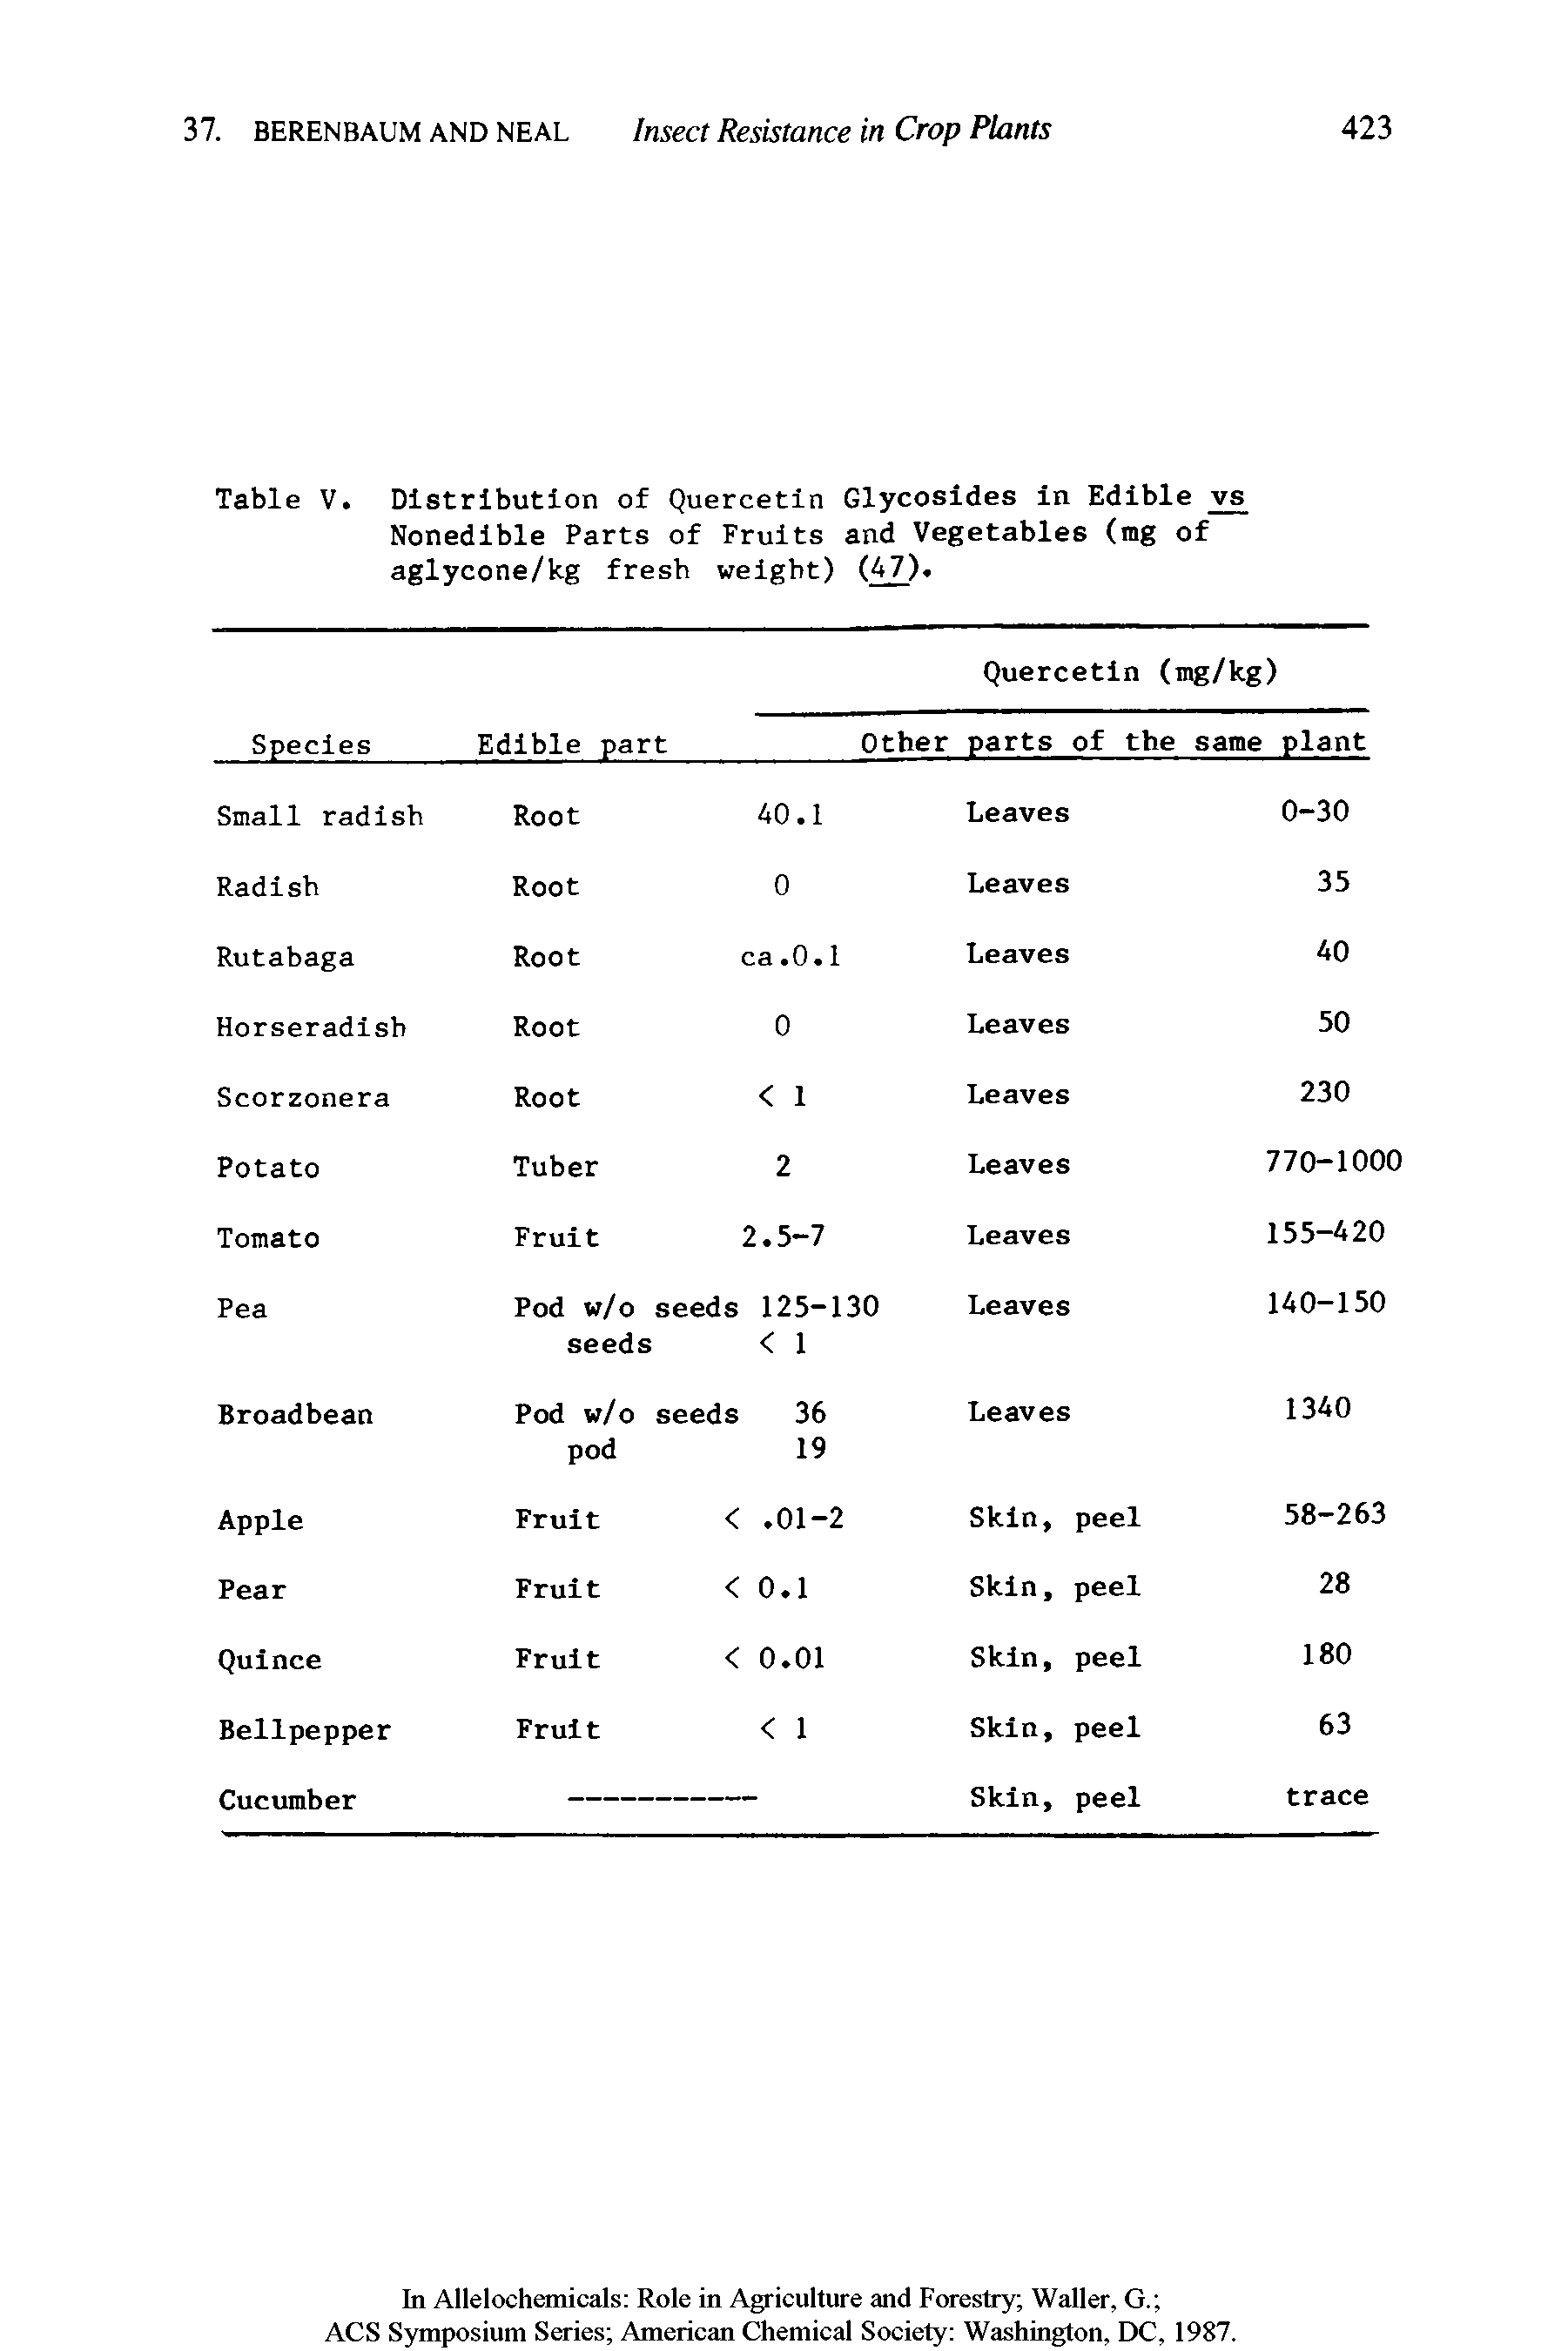 Table V. Distribution of Quercetin Glycosides In Edible Nonedible Parts of Fruits and Vegetables (mg of aglycone/kg fresh weight) (47) ...